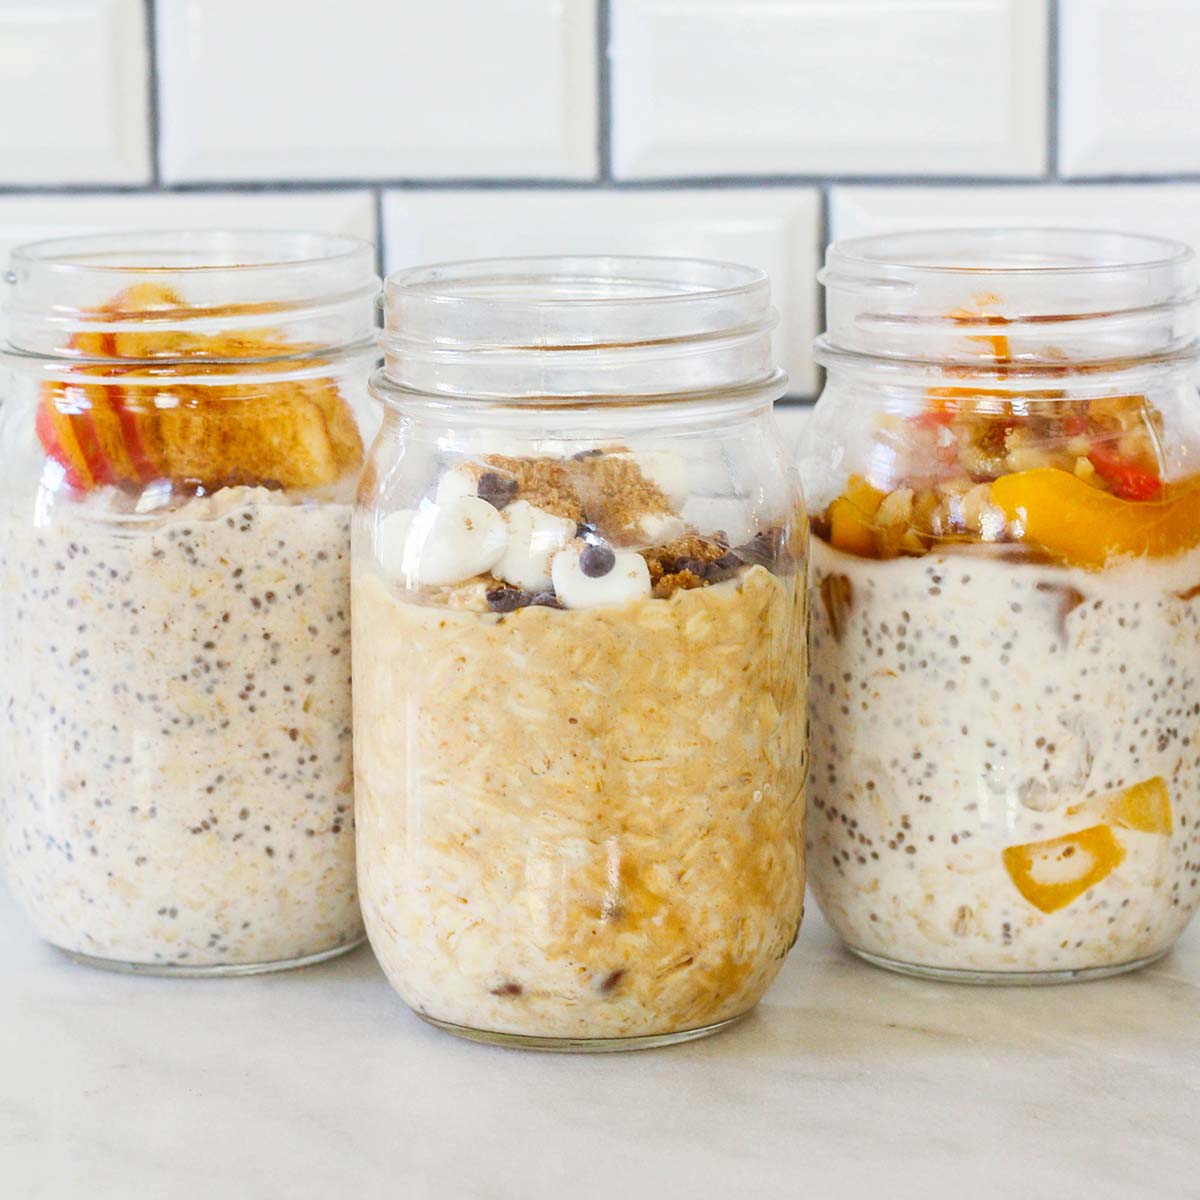 three jars with overnight oats in each and different toppings